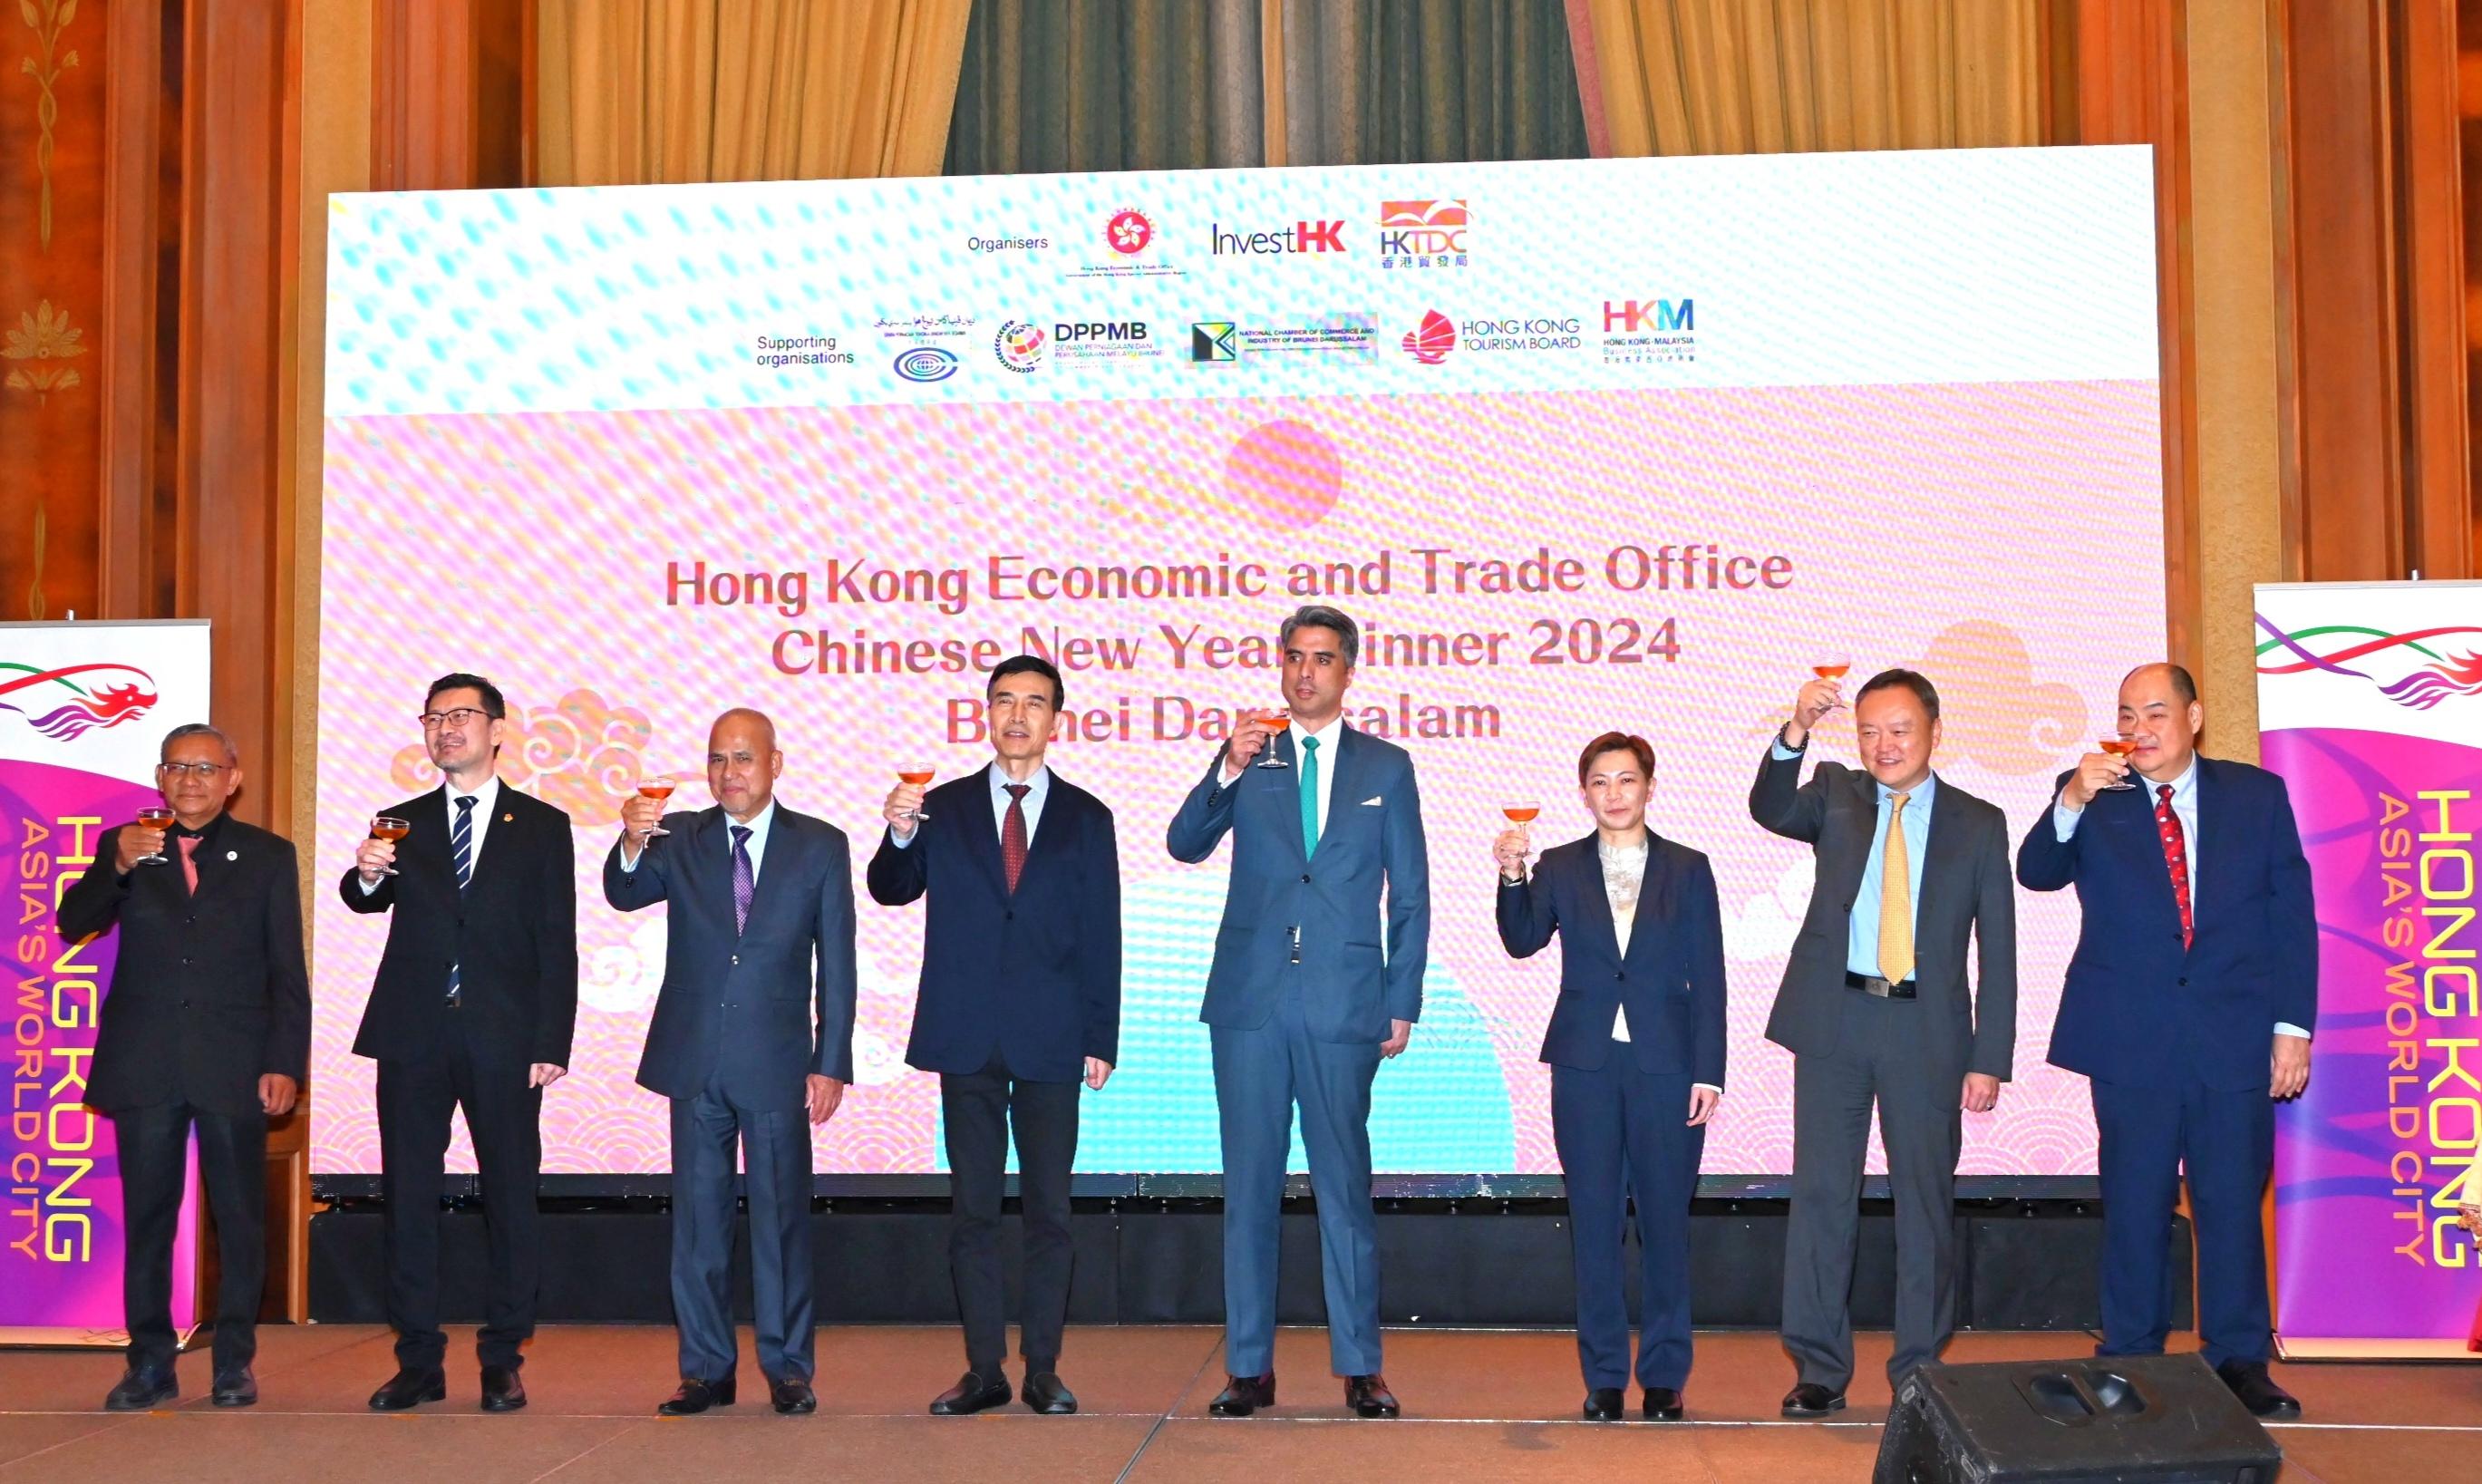 The Hong Kong Economic and Trade Office, Jakarta (HKETO Jakarta) today (February 1) hosted a Chinese New Year dinner in Bandar Seri Begawan, Brunei Darussalam. Photo shows (from fourth left) the Chinese Ambassador to Brunei Darussalam, Mr Xiao Jianguo; the Deputy Permanent Secretary (Trade and Industry) of the Ministry of Finance and Economy of Brunei Darussalam, Mr Mohammad Harris bin Brigadier Jeneral (Rtd) Dato Paduka Haji Ibrahim; the Director-General of the HKETO Jakarta, Miss Libera Cheng; the Regional Director of South East Asia and South Asia of the Hong Kong Trade Development Council, Mr Ronald Ho, and other officiating guests hosting a toasting ceremony.